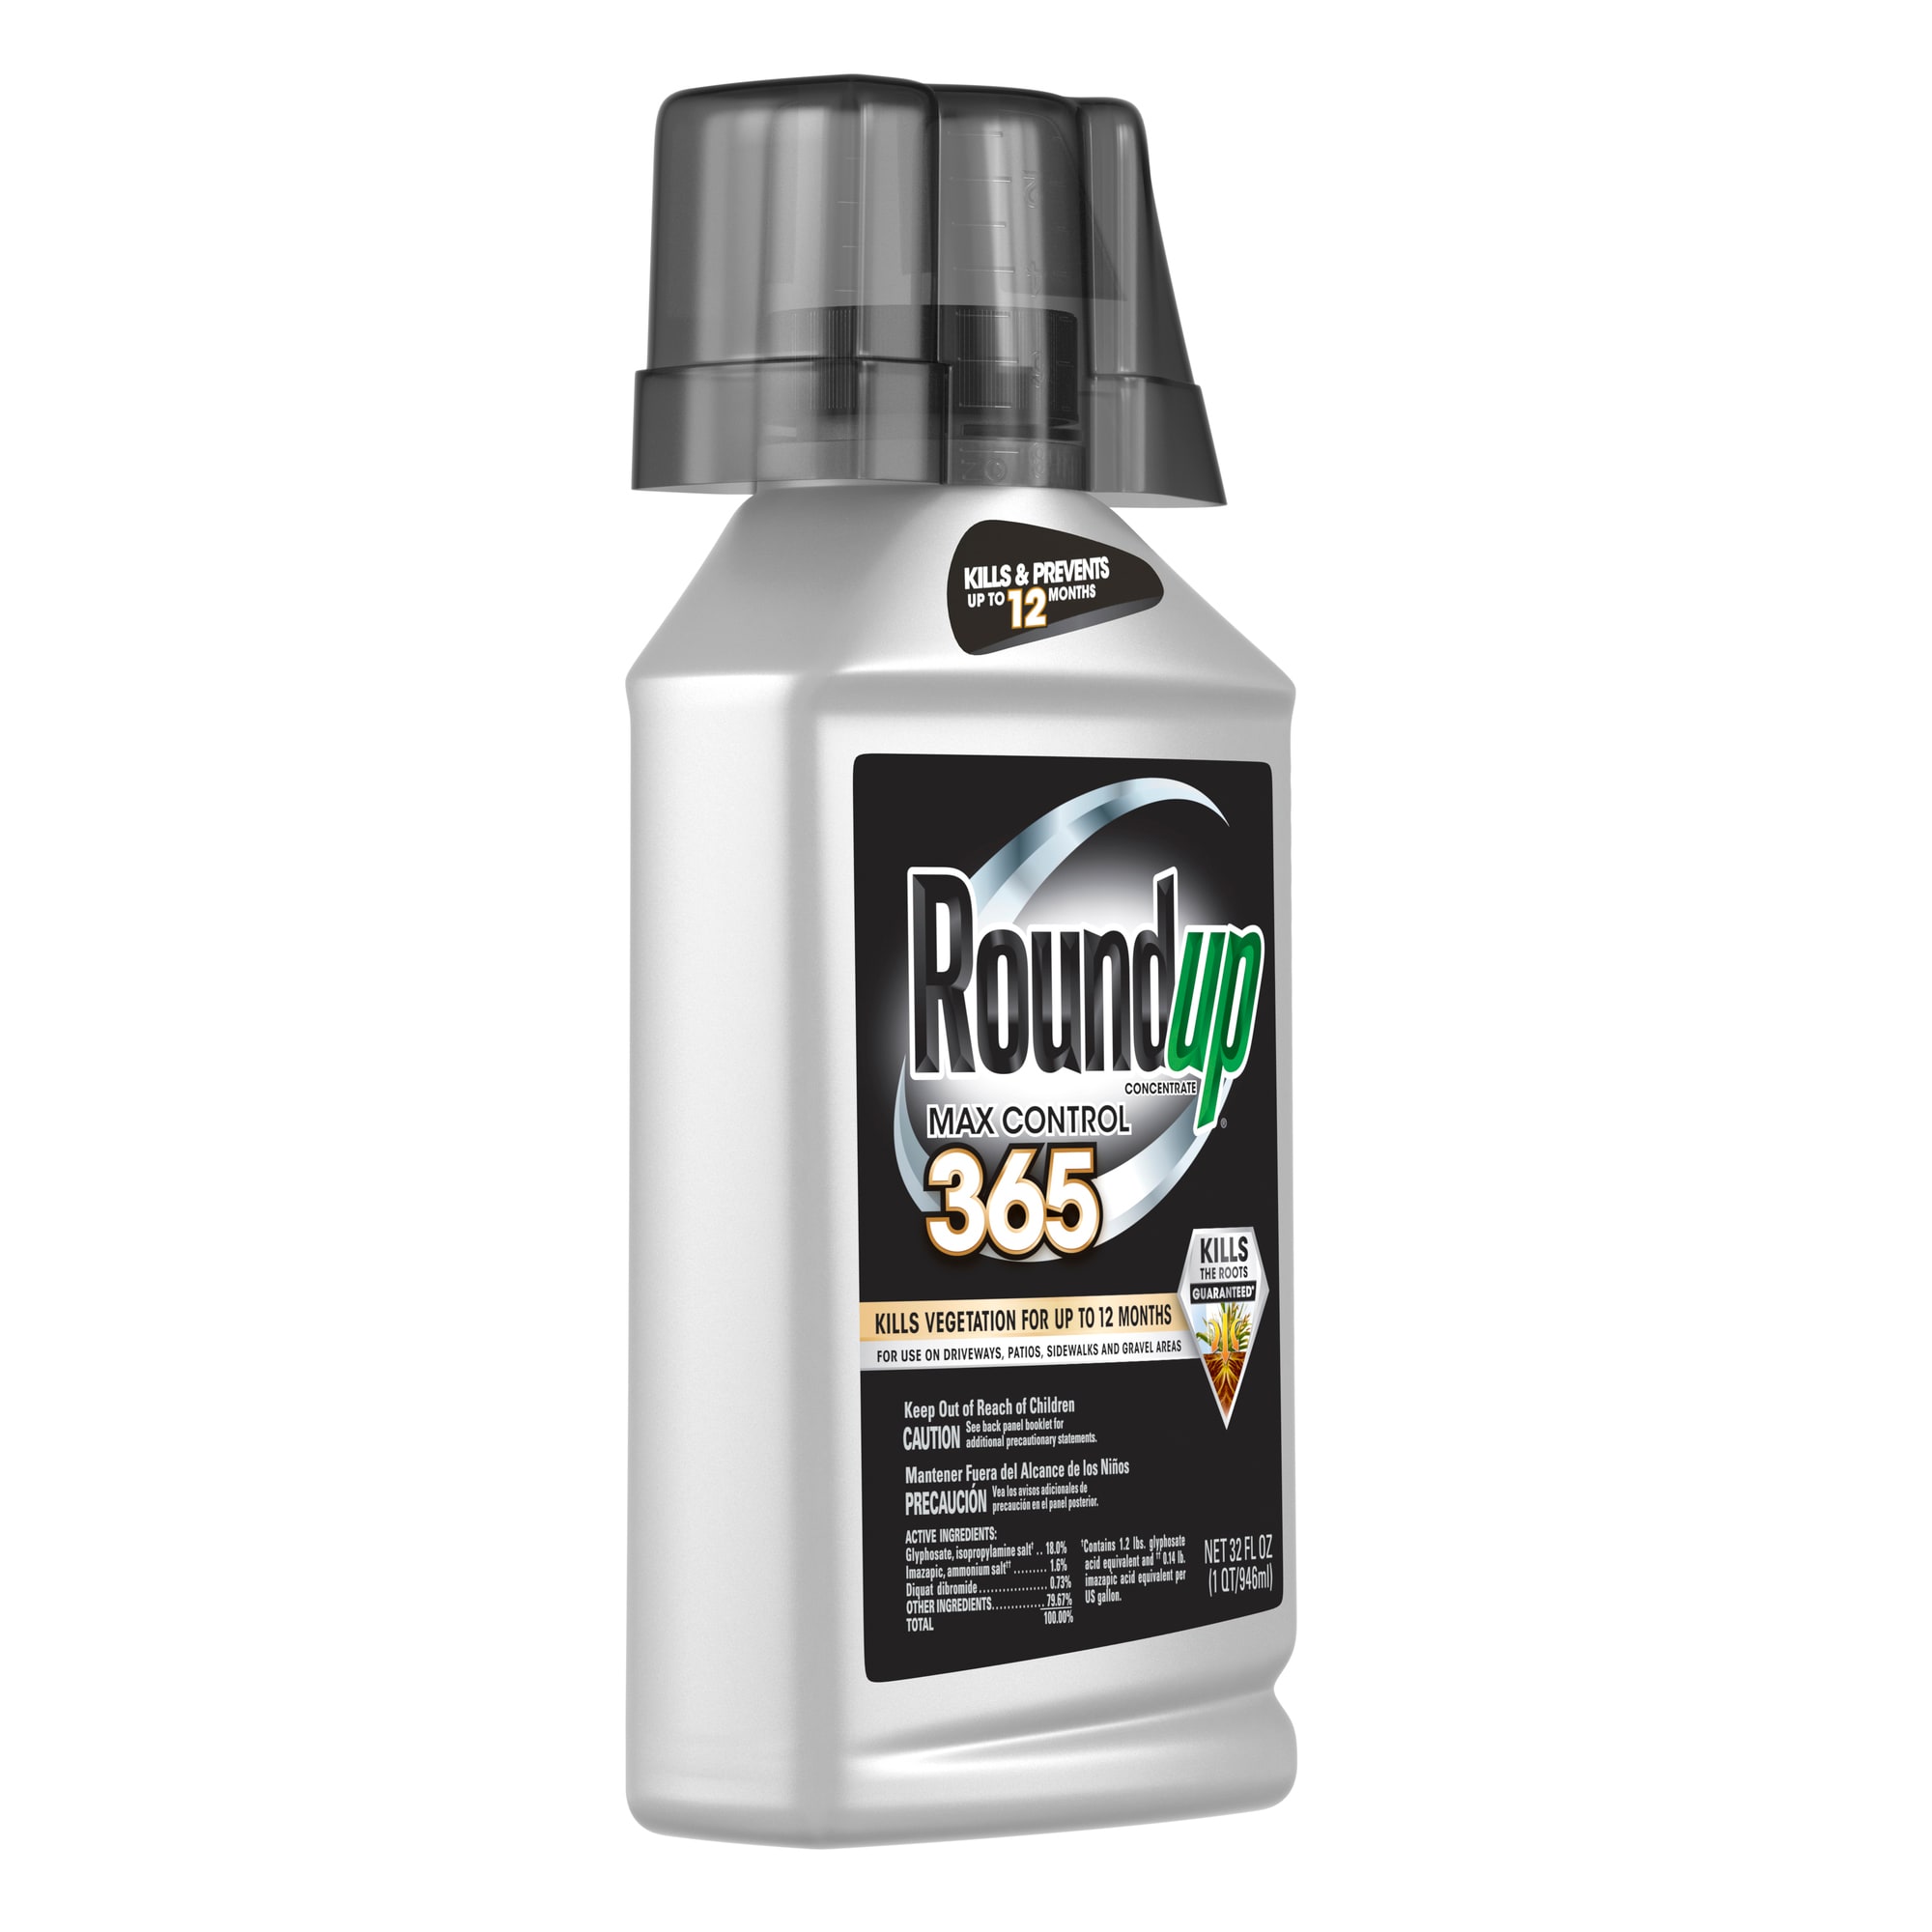 Looking for Hortico weed killer 360 conc